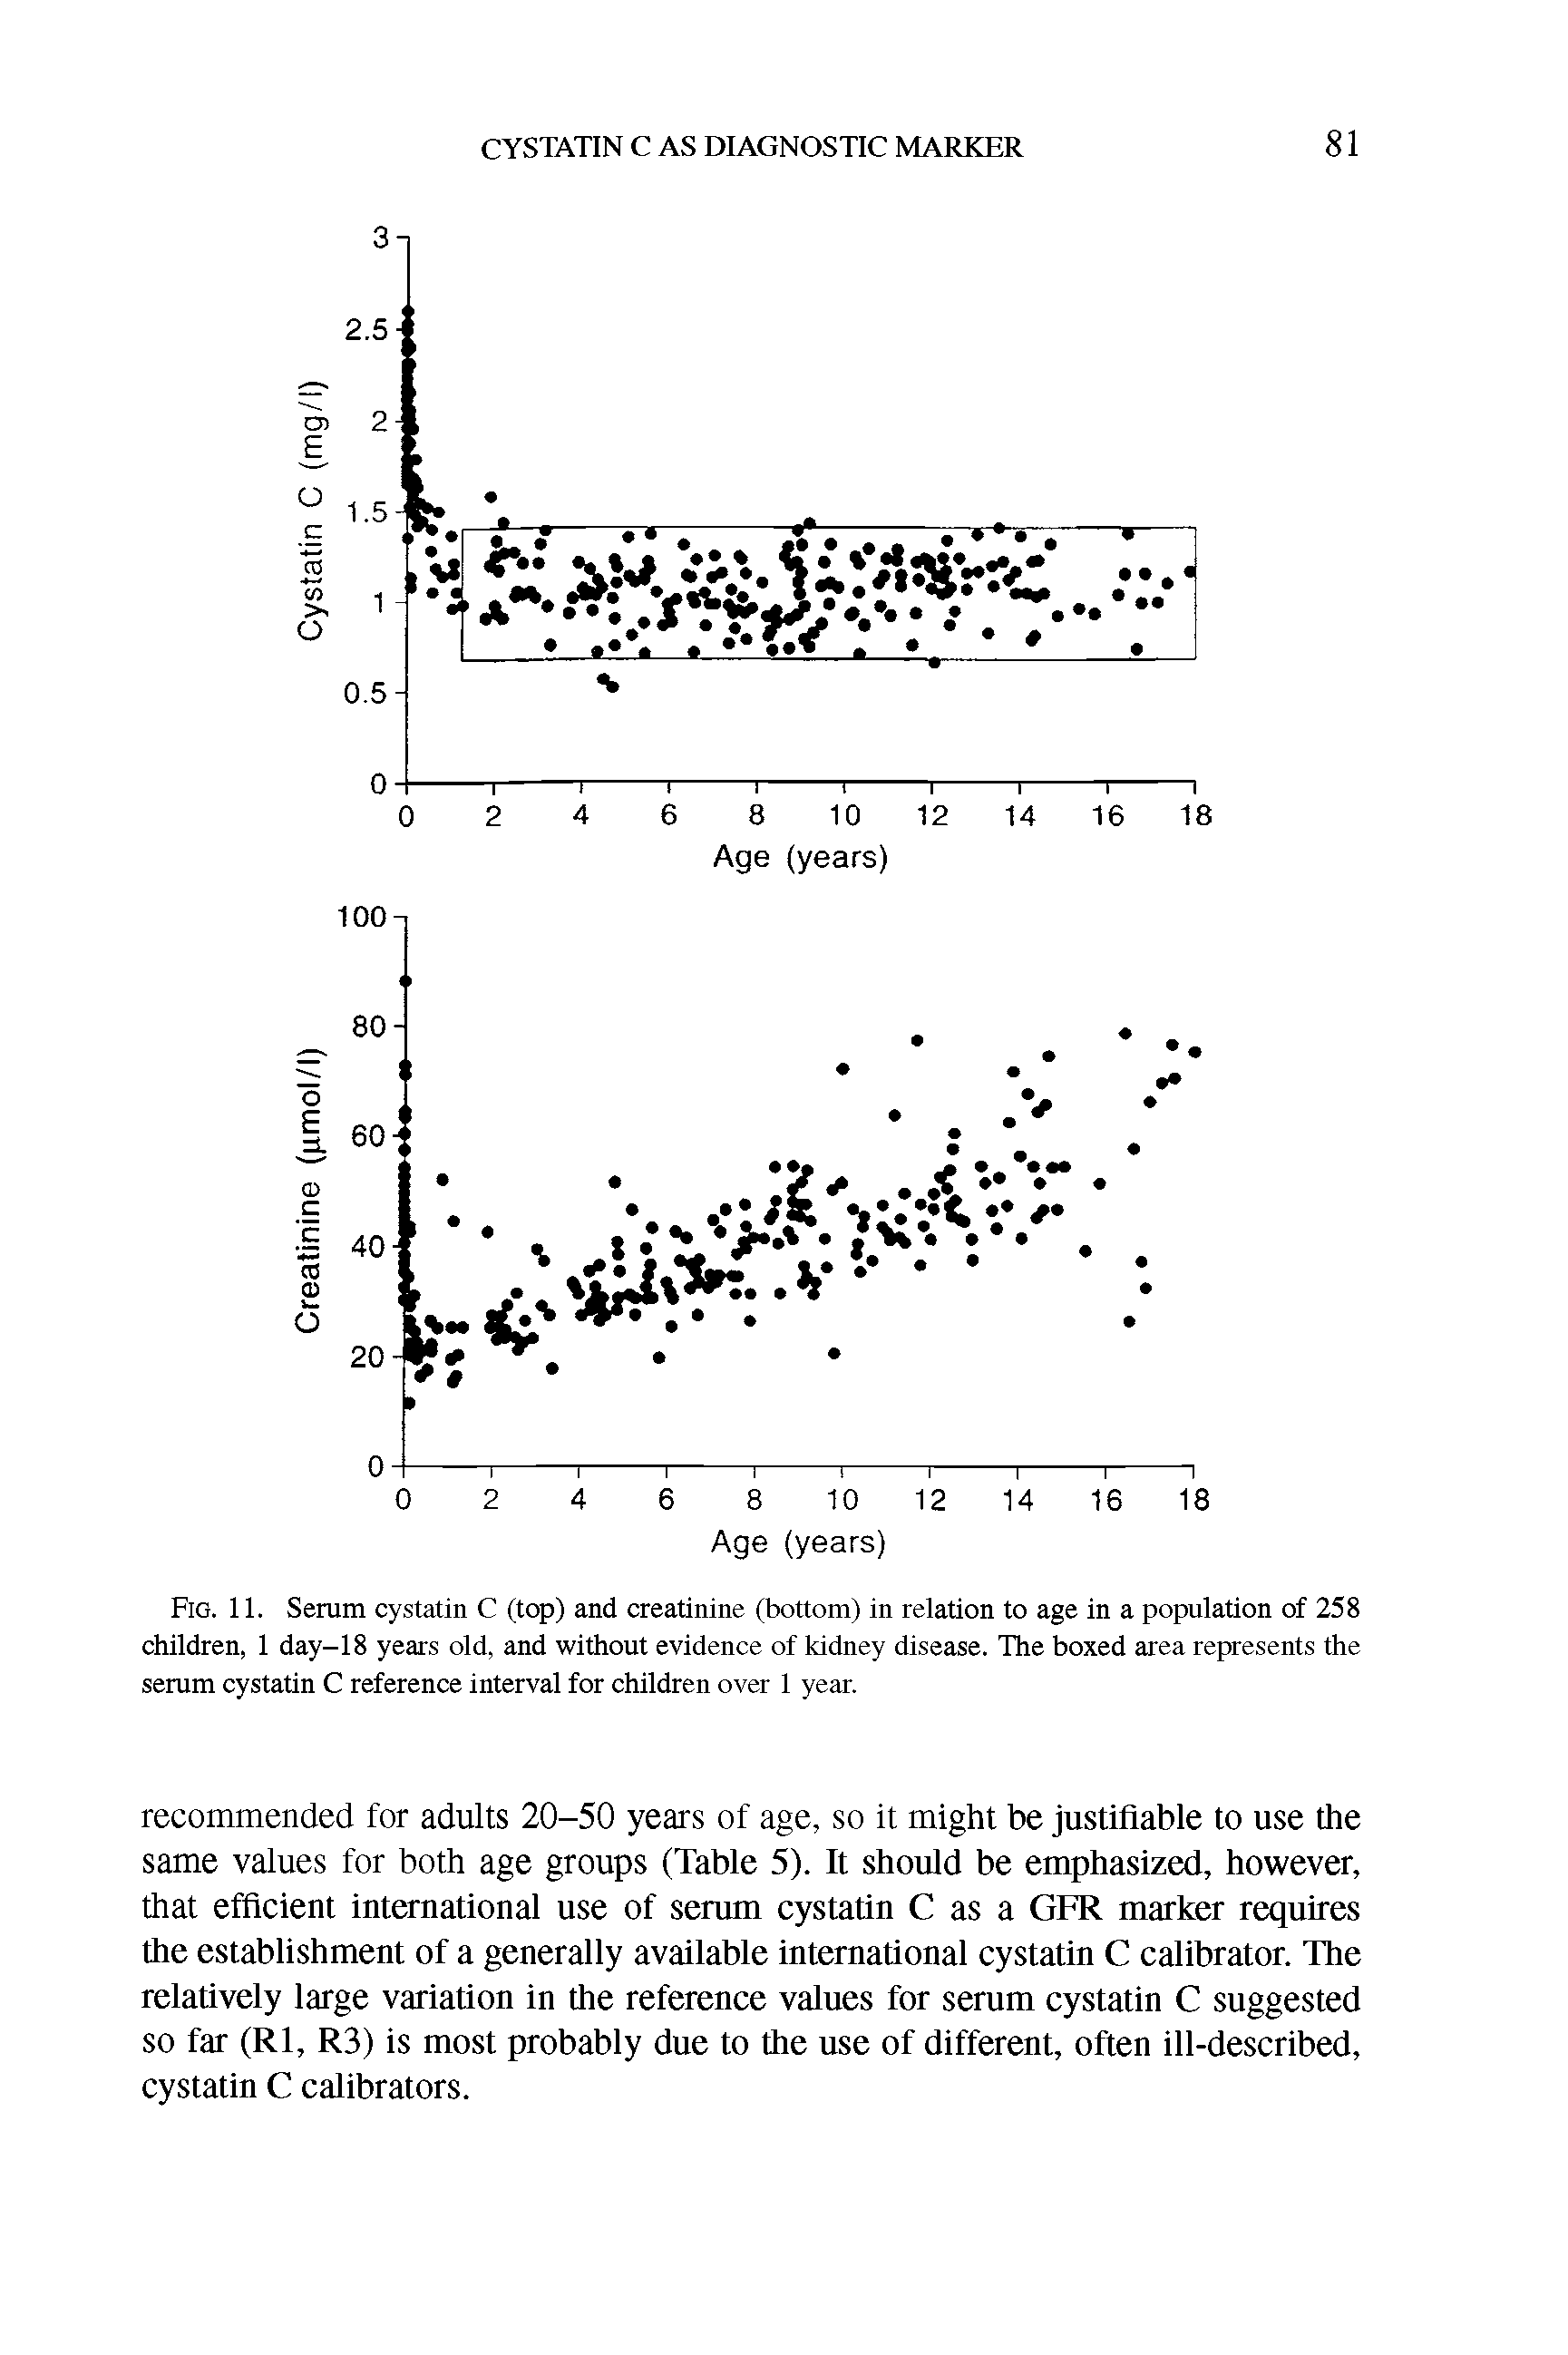 Fig. 11. Serum cystatin C (top) and creatinine (bottom) in relation to age in a population of 258 children, 1 day-18 years old, and without evidence of kidney disease. The boxed area represents the serum cystatin C reference interval for children over 1 year.